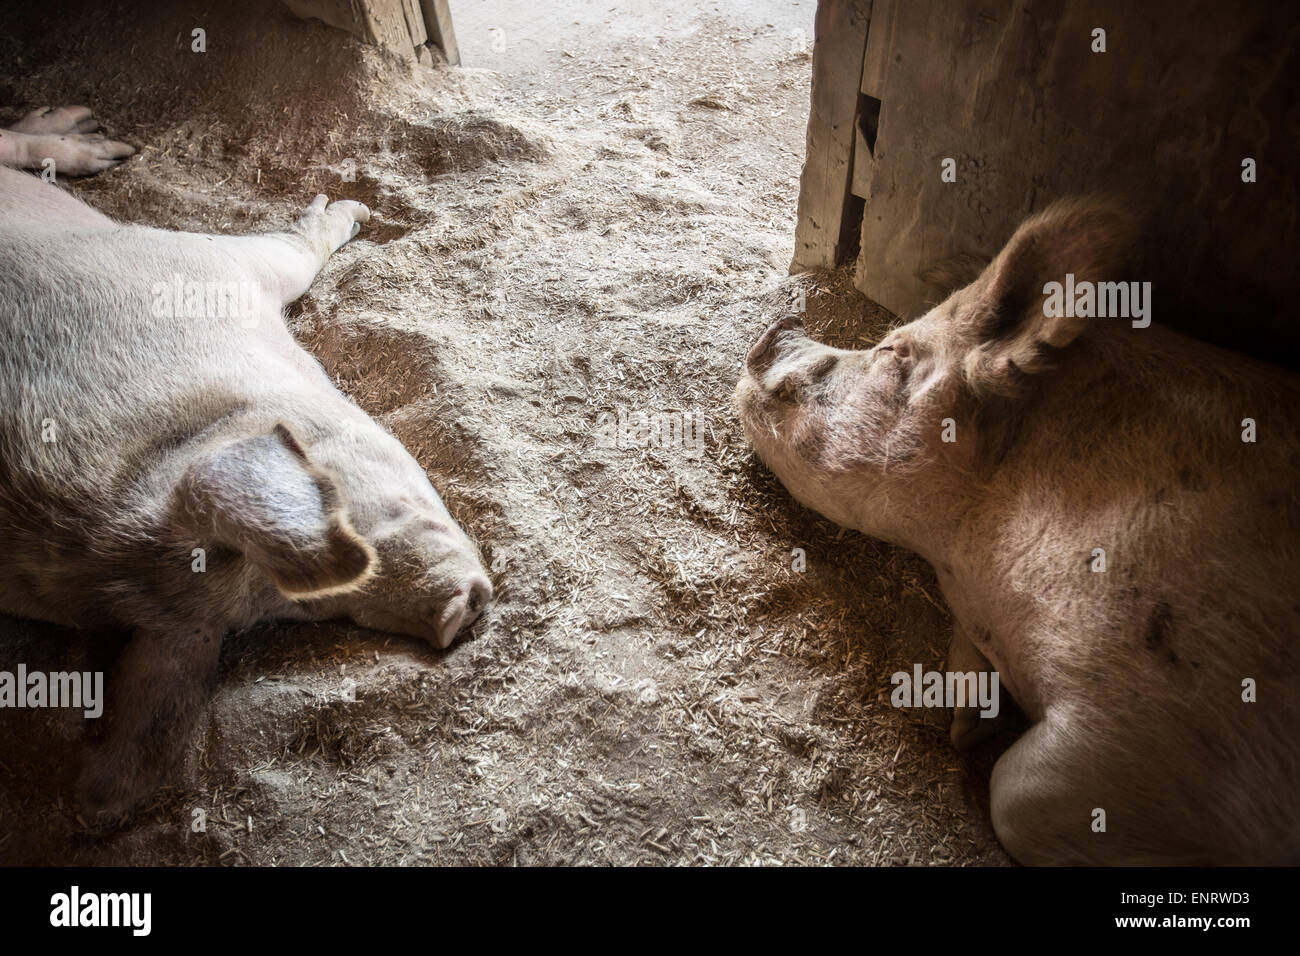 Farm Sanctuary in Acton, California. A farm animal protection organization with sanctuaries in New York and California. Stock Photo